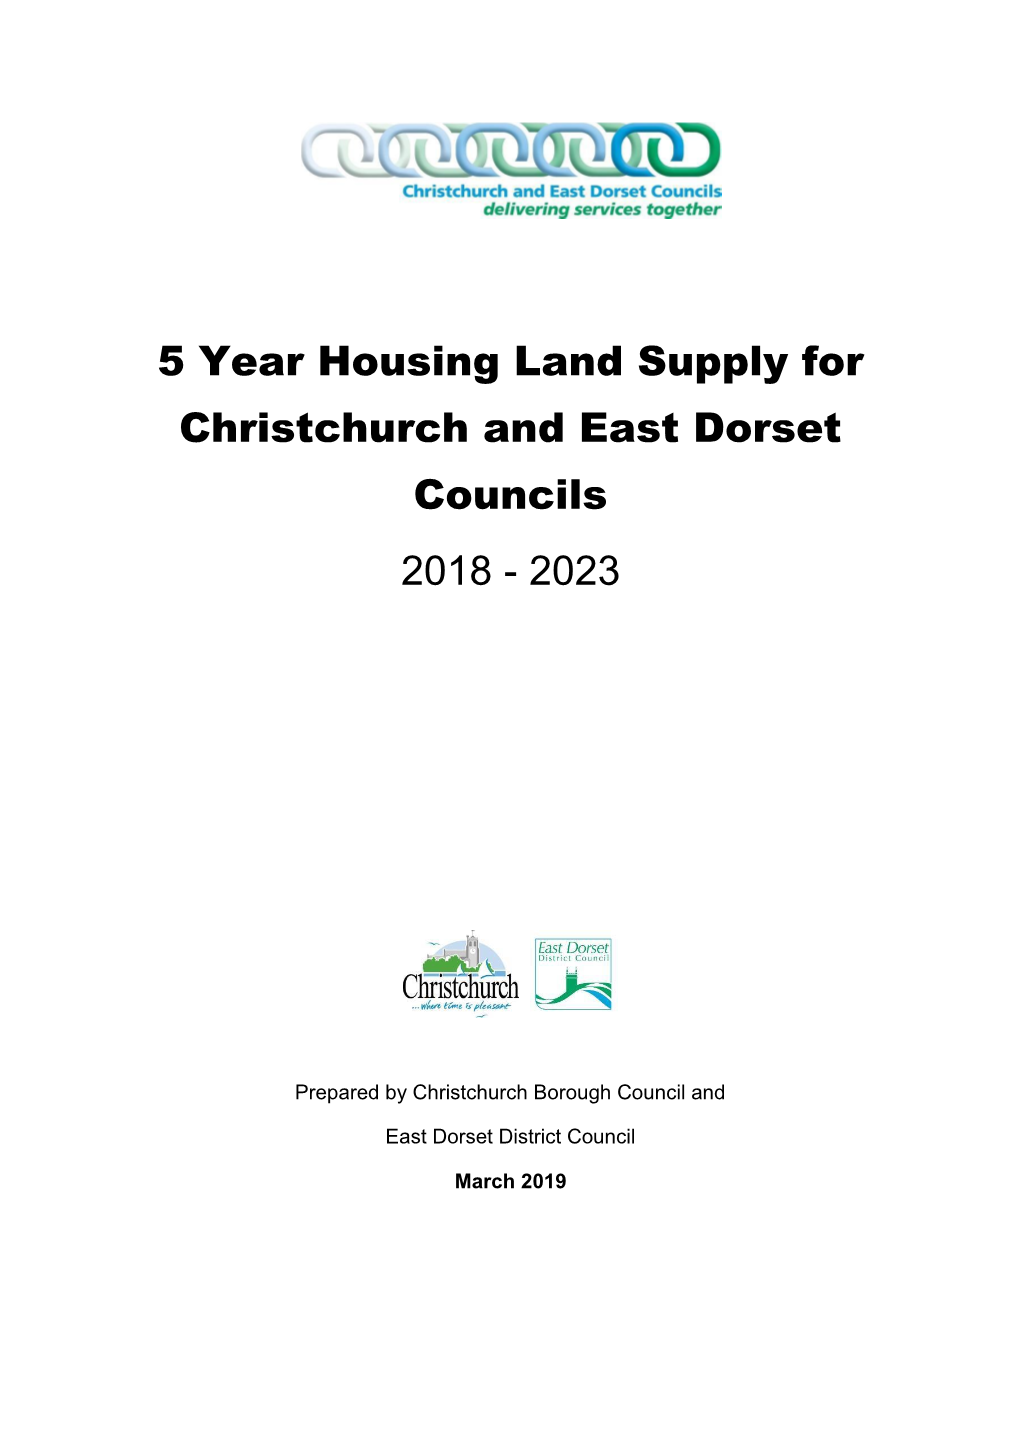 Christchurch and East Dorset 5 Year Housing Land Supply 2018-2023